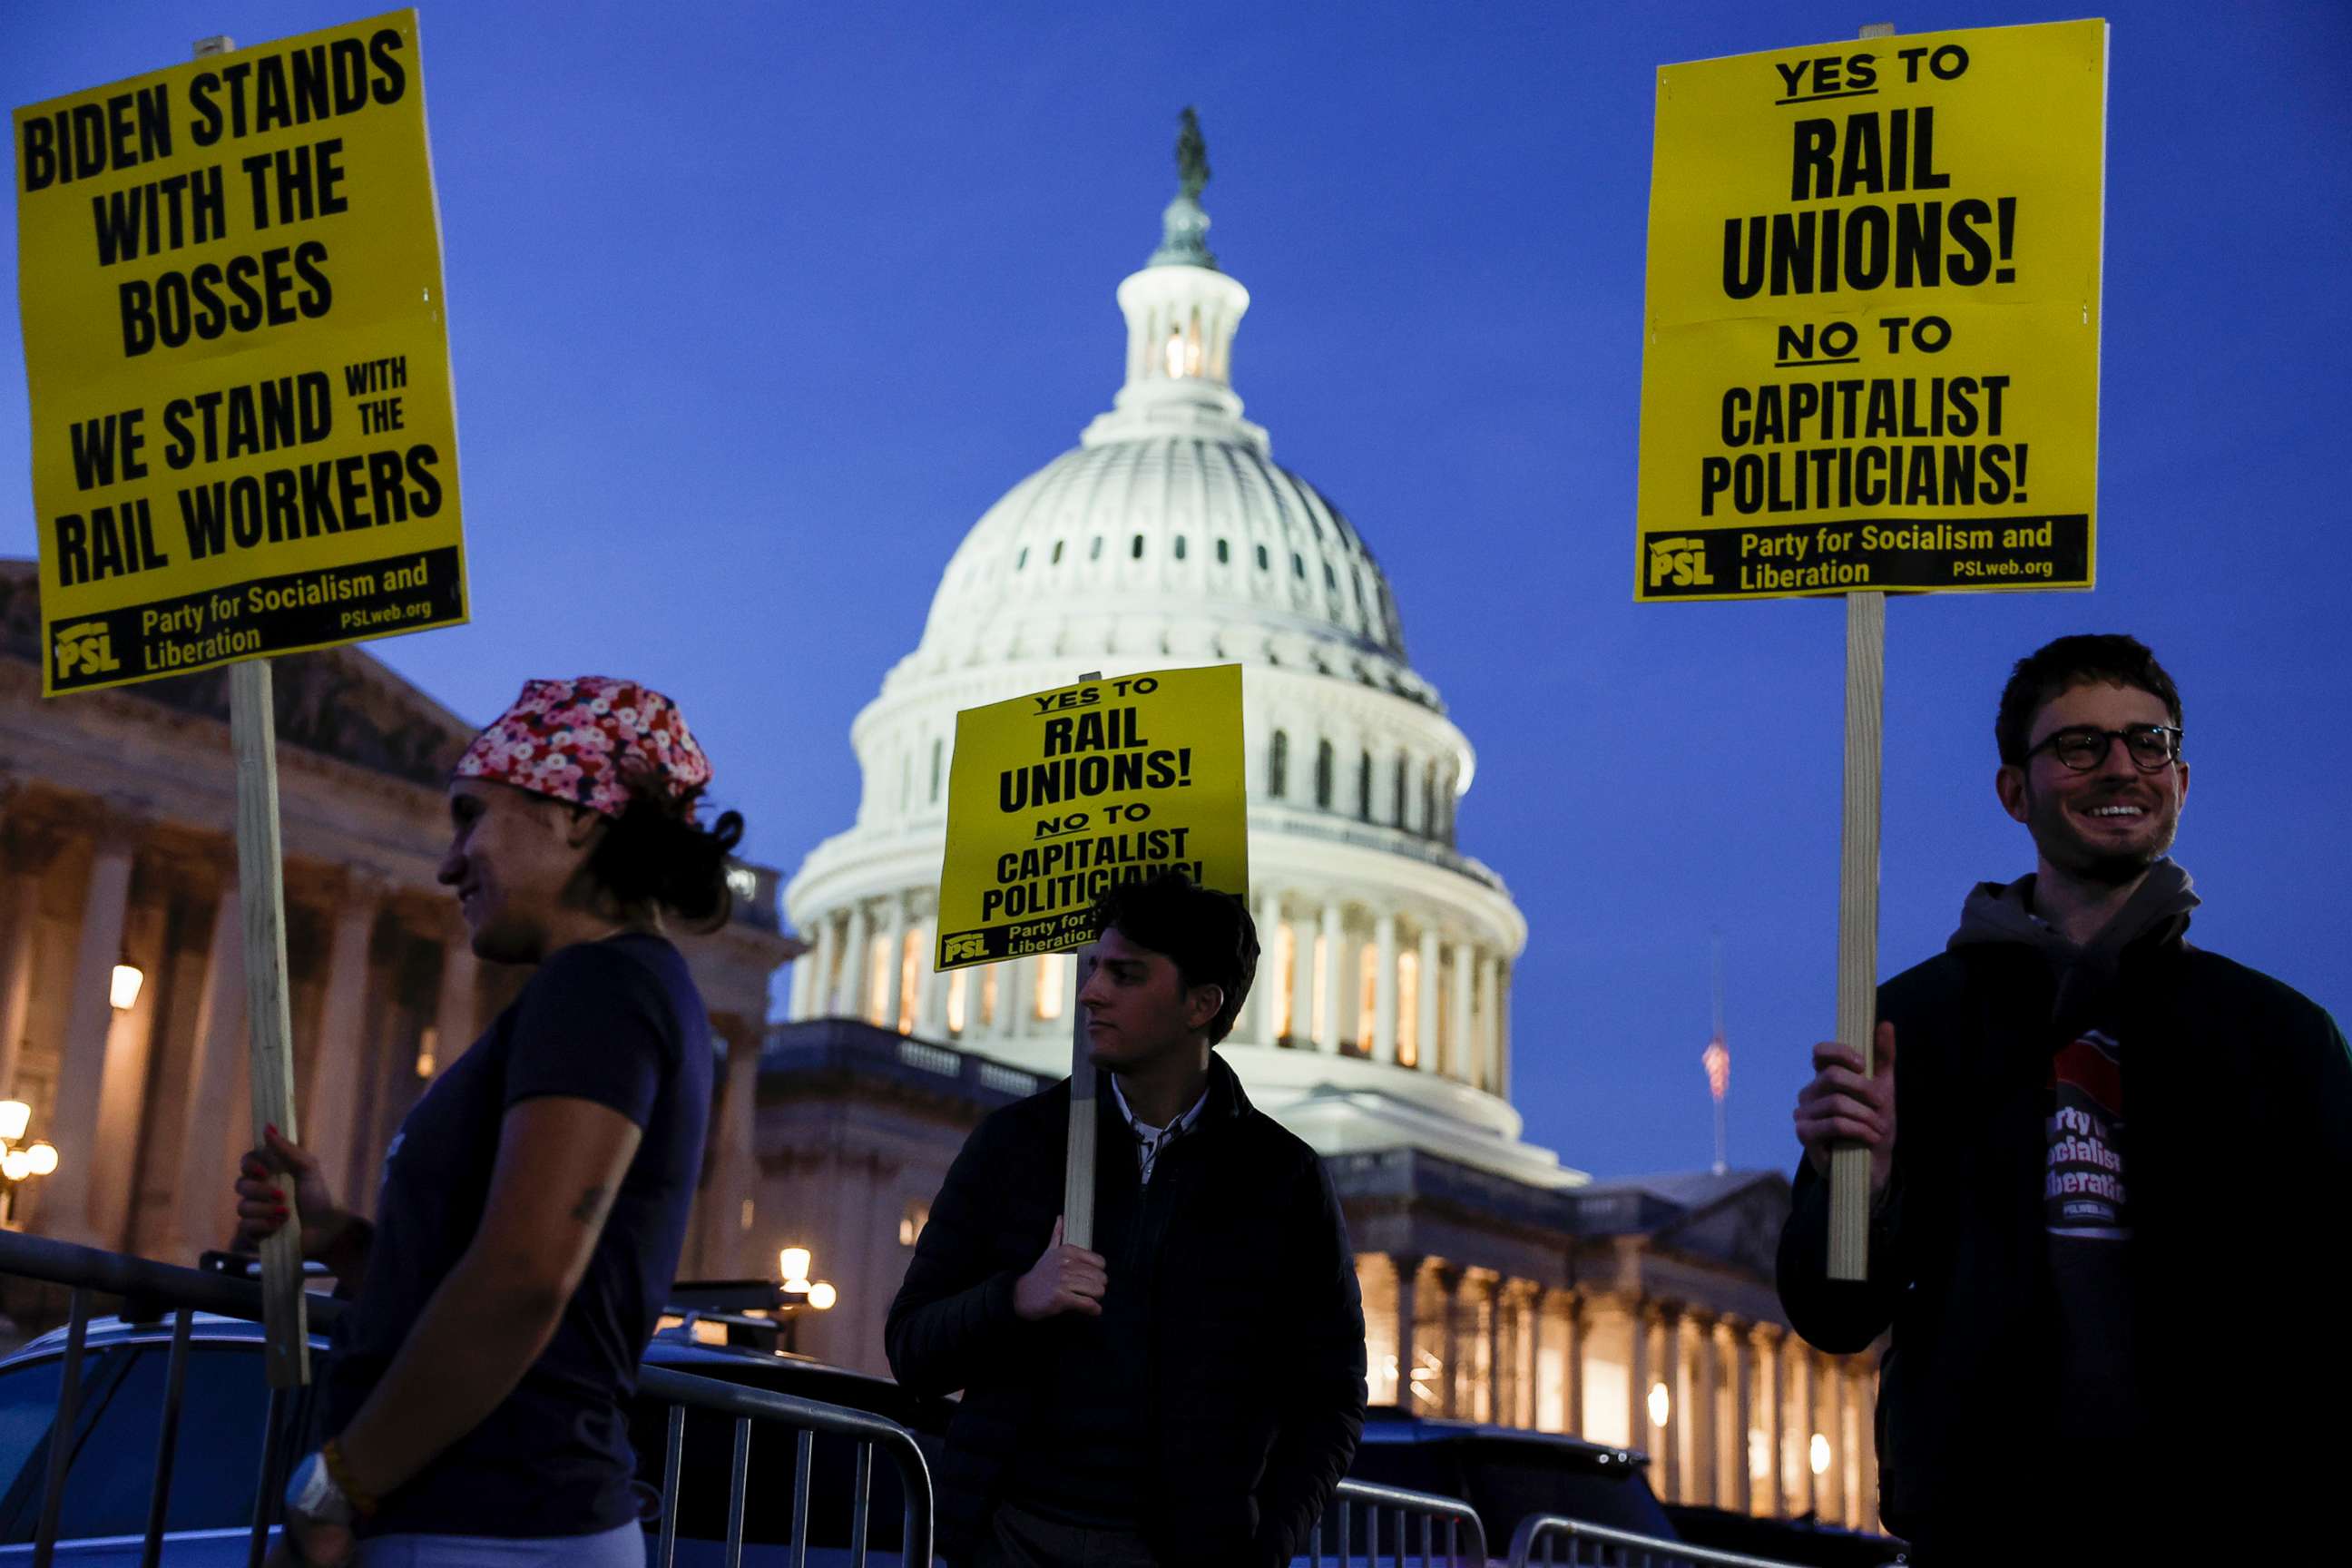 PHOTO: Activists in support of unionized rail workers protest outside the U.S. Capitol Building on Nov. 29, 2022 in Washington.